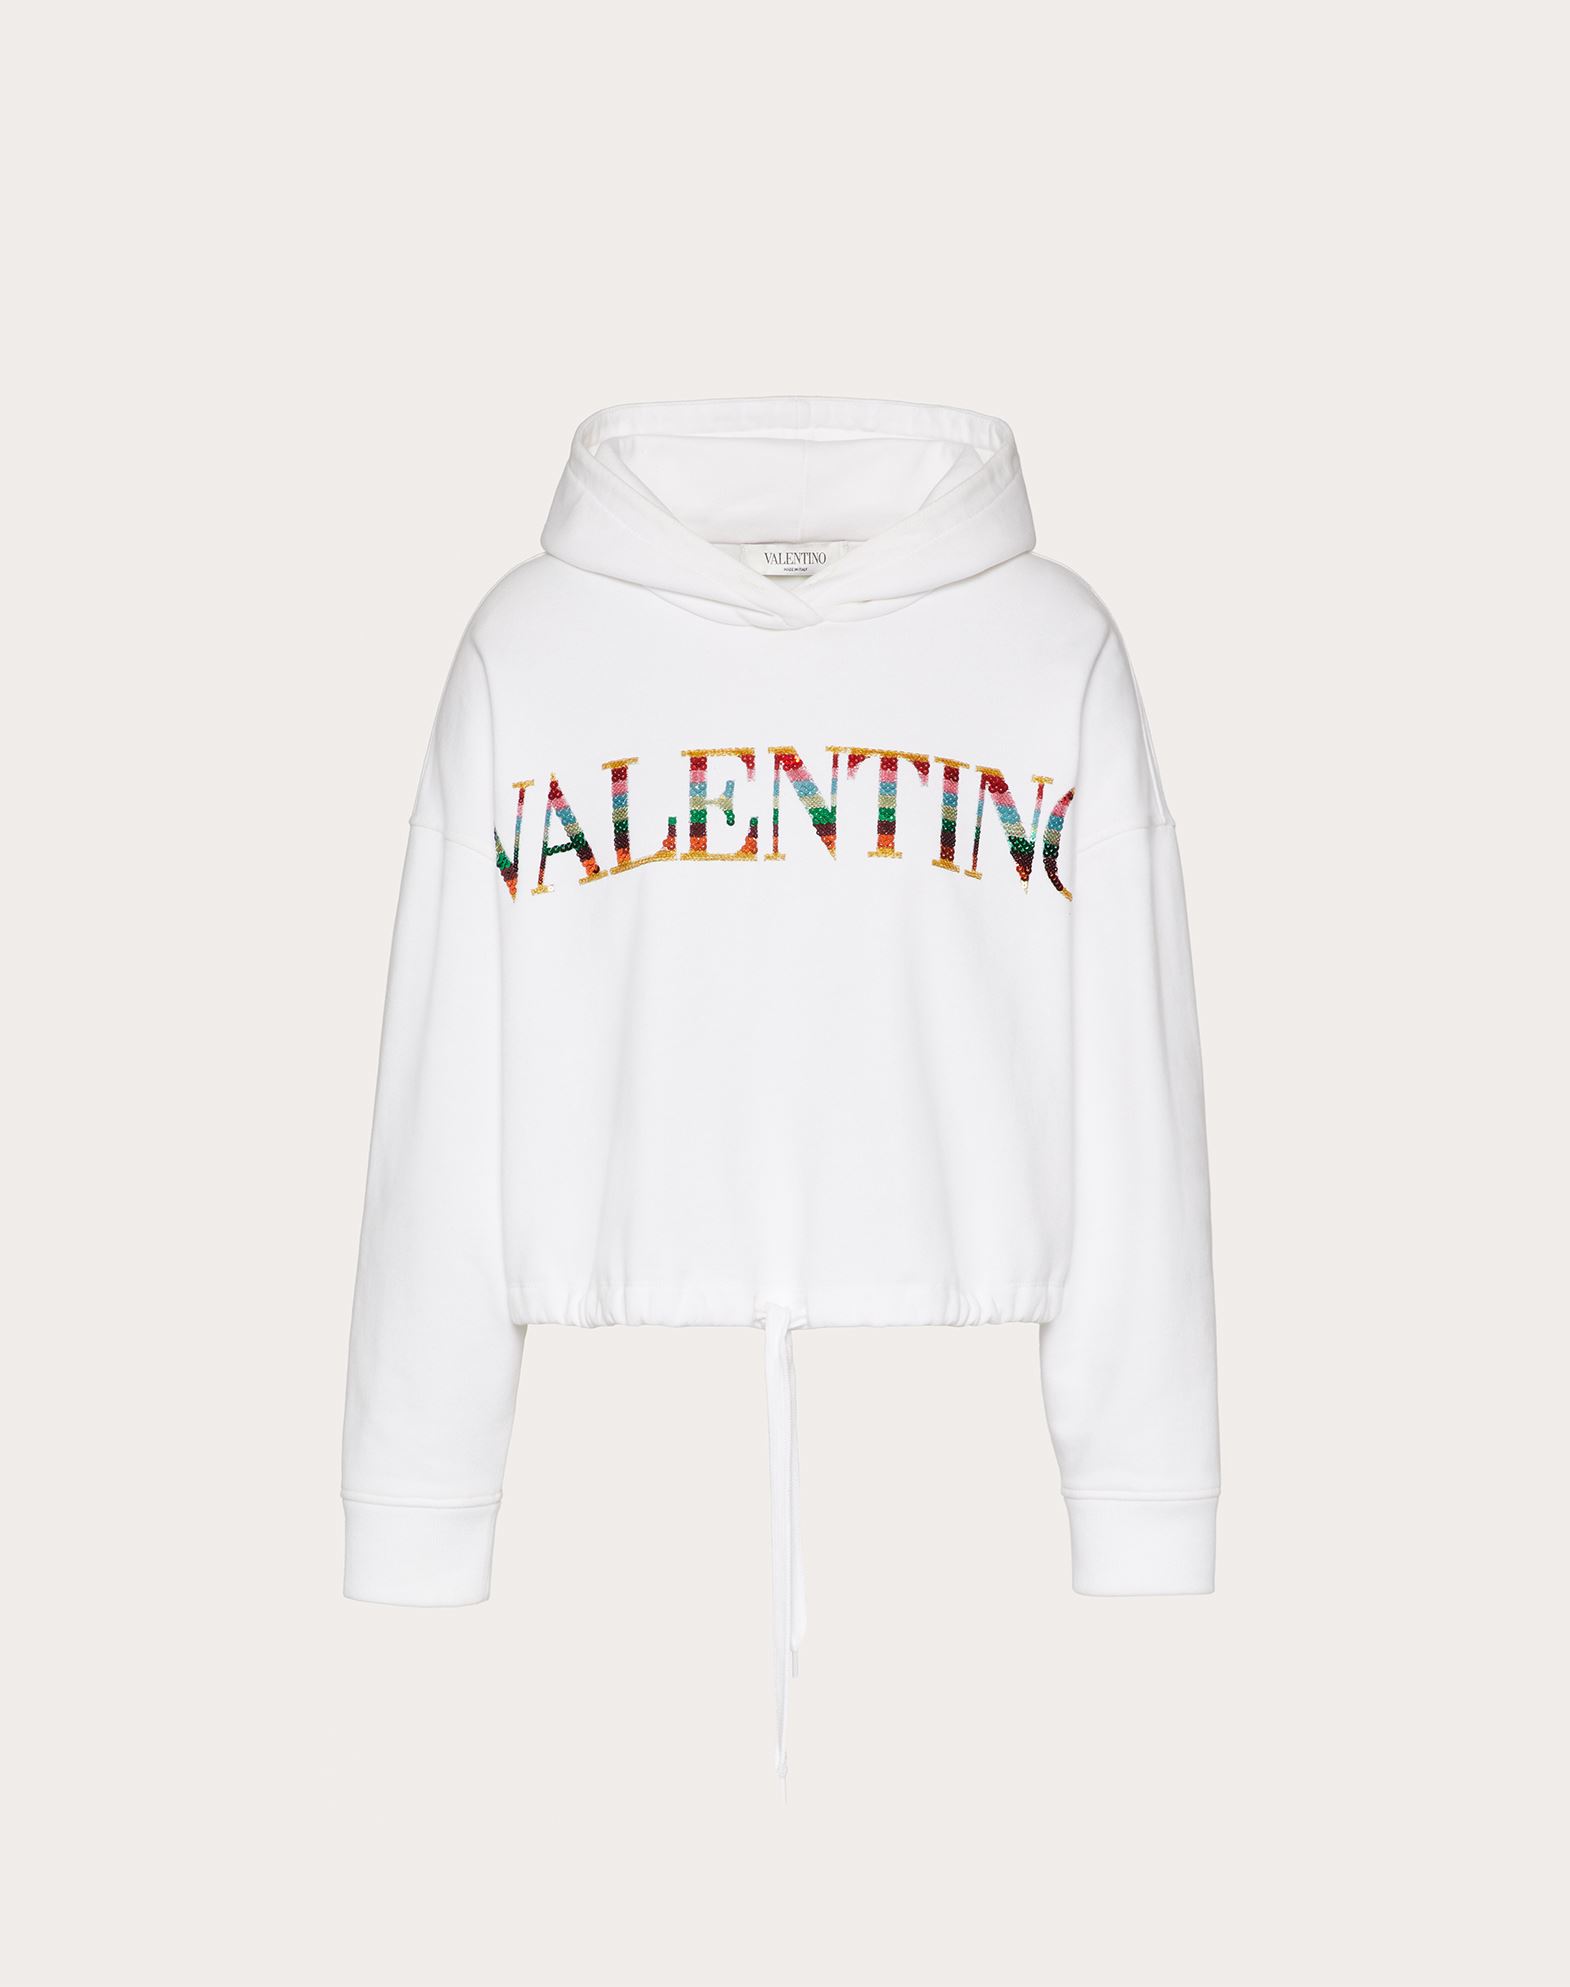 Valentino Women's Logo-sequined Cotton Hooded Sweatshirt In White/multicolor